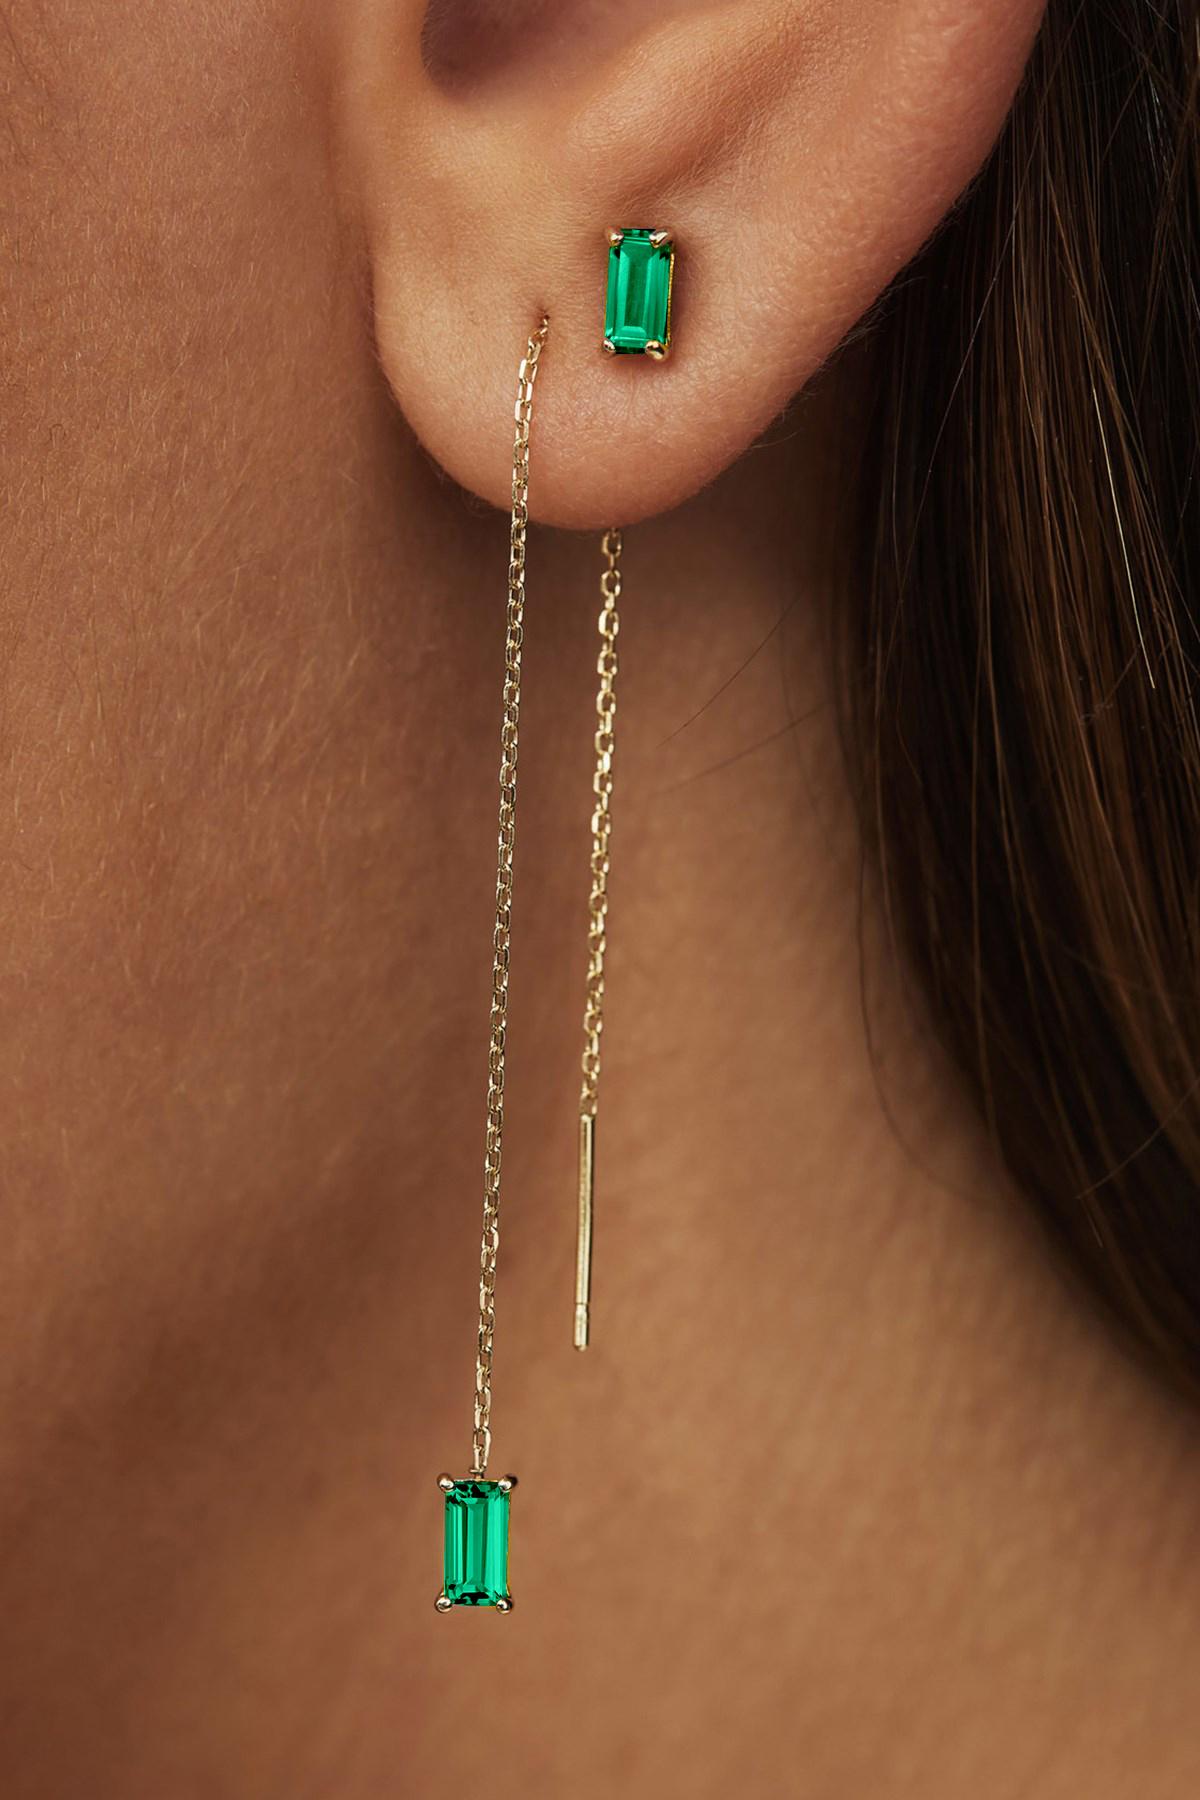 14k Solid Gold Drop Earrings with Emeralds, Chain Gold Earrings For Sale 5